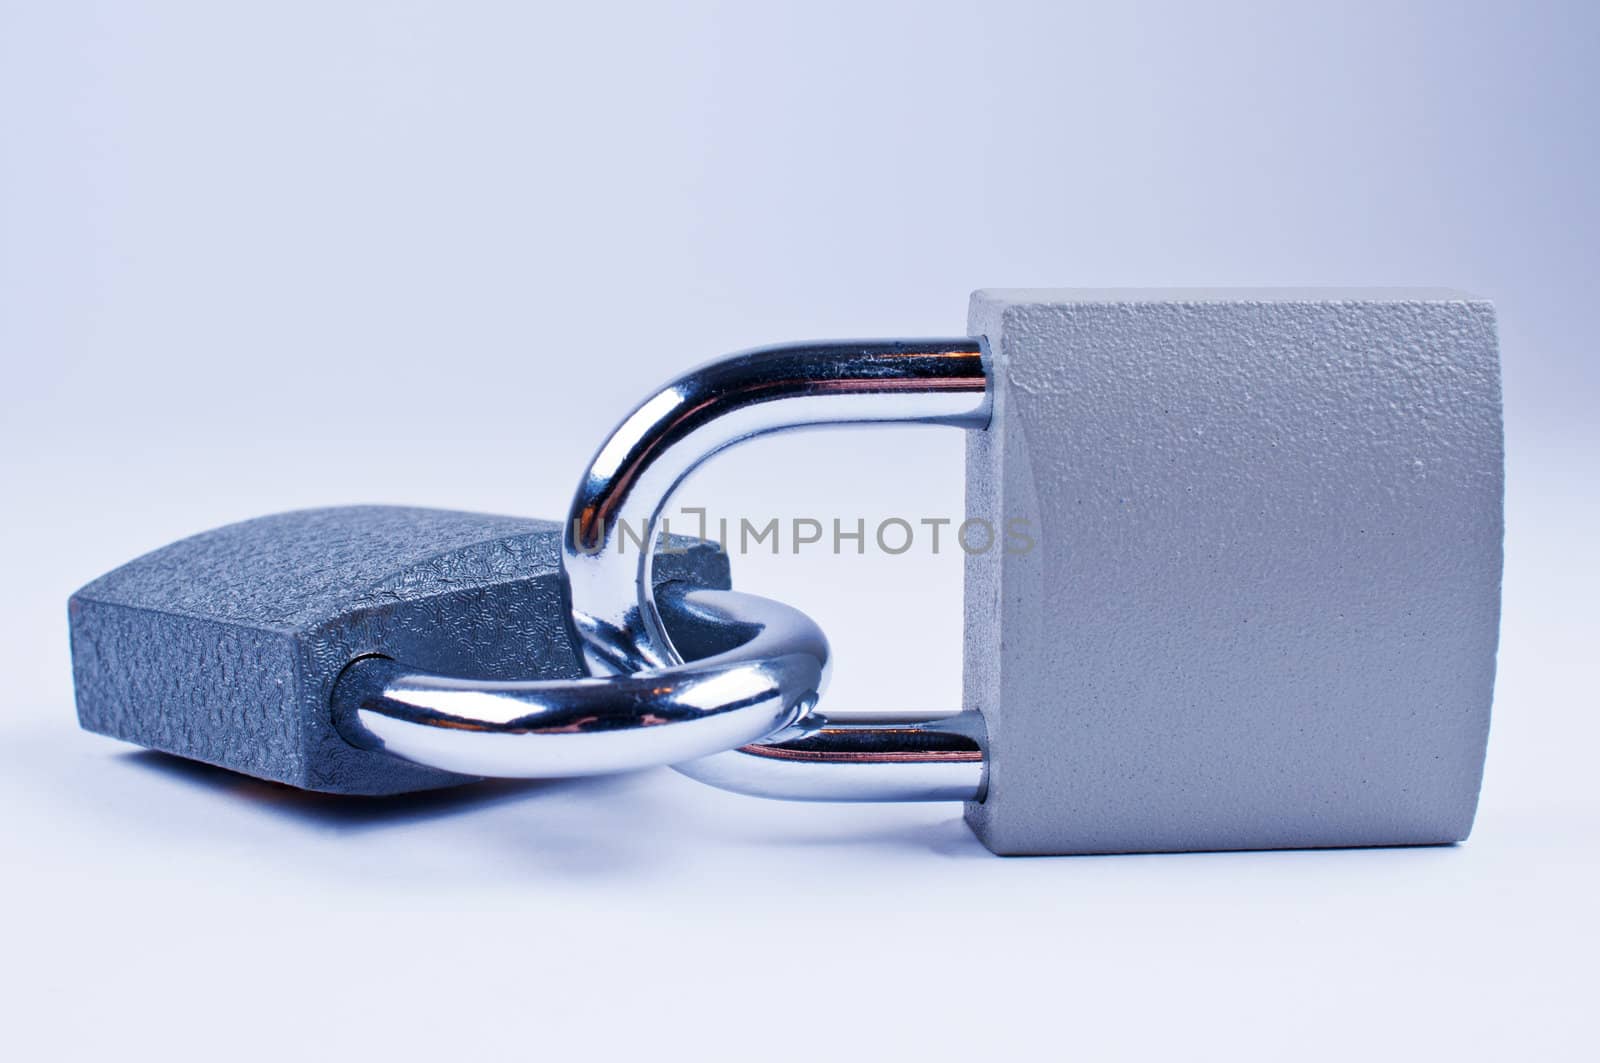 Two padlocks with a key on grey background